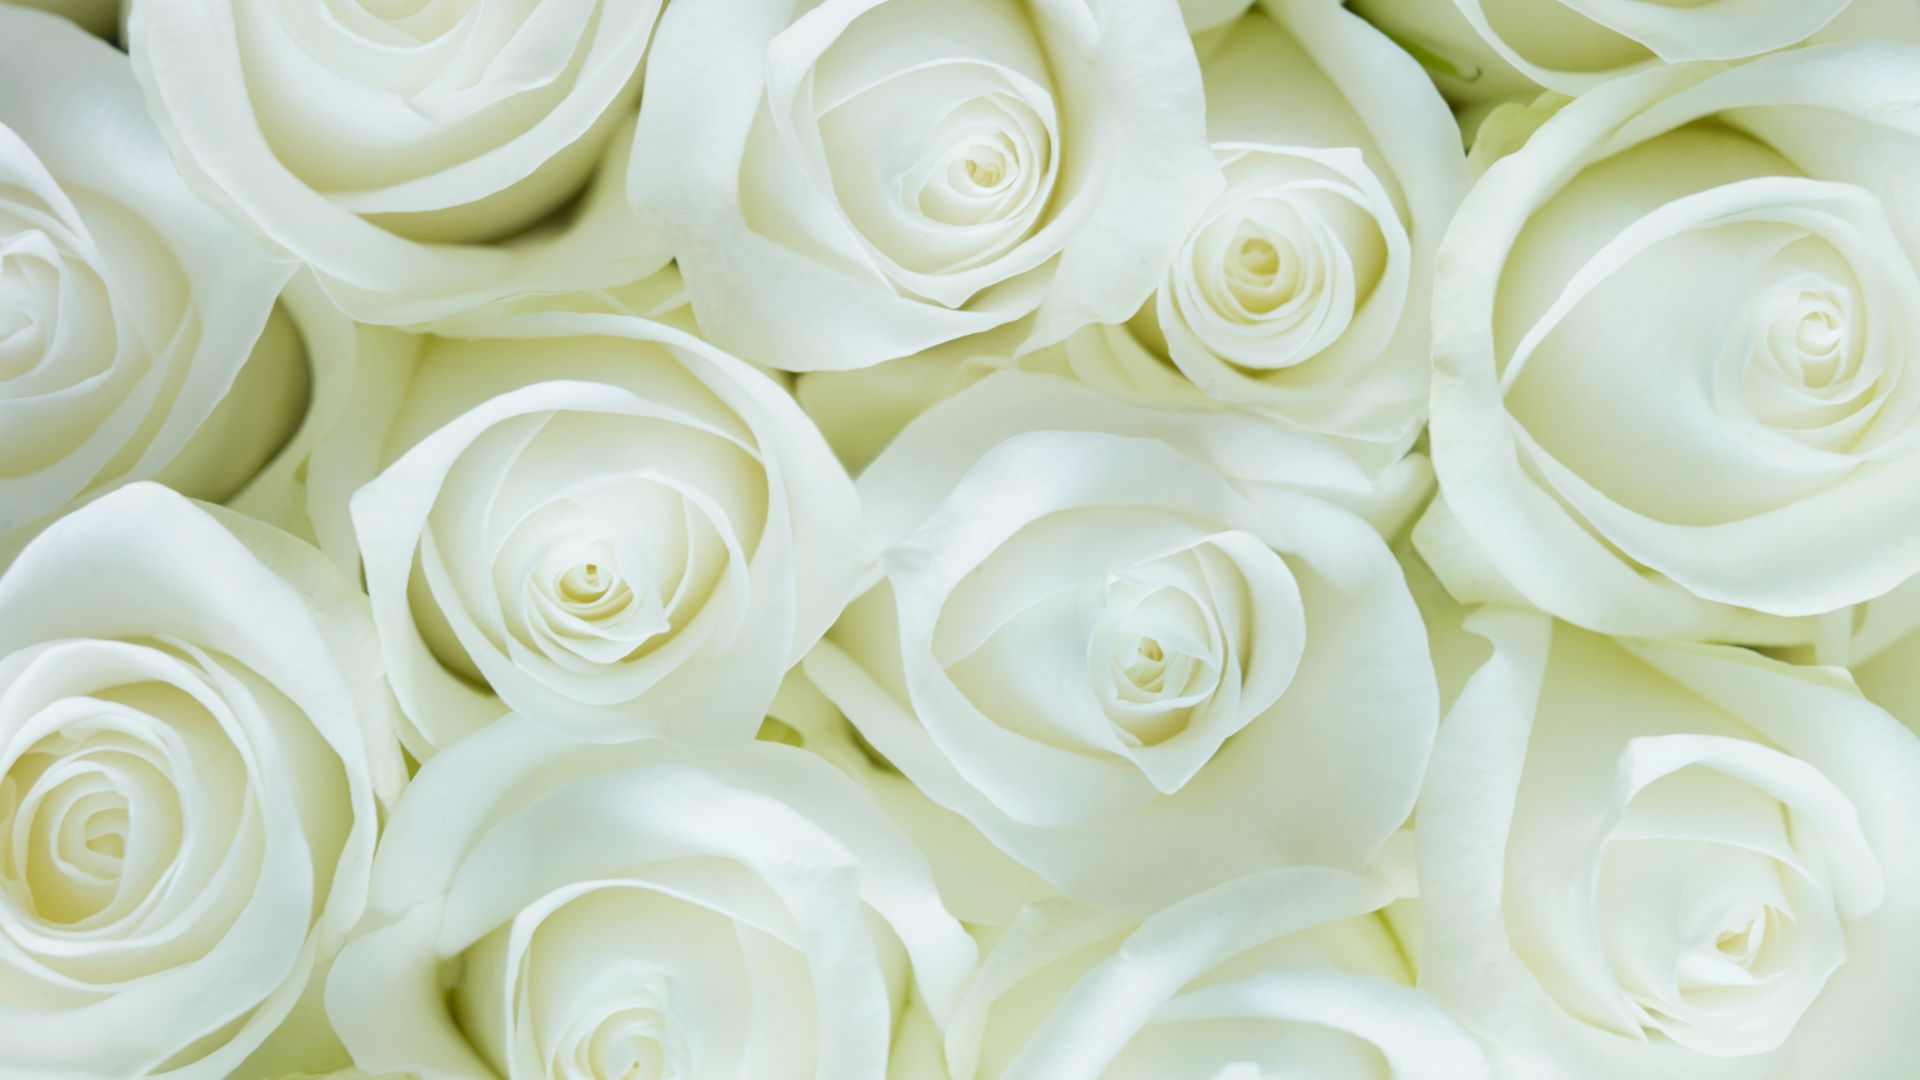 Desktop Wallpaper White Roses, Flowers, Close Up, Hd Image, Picture ...